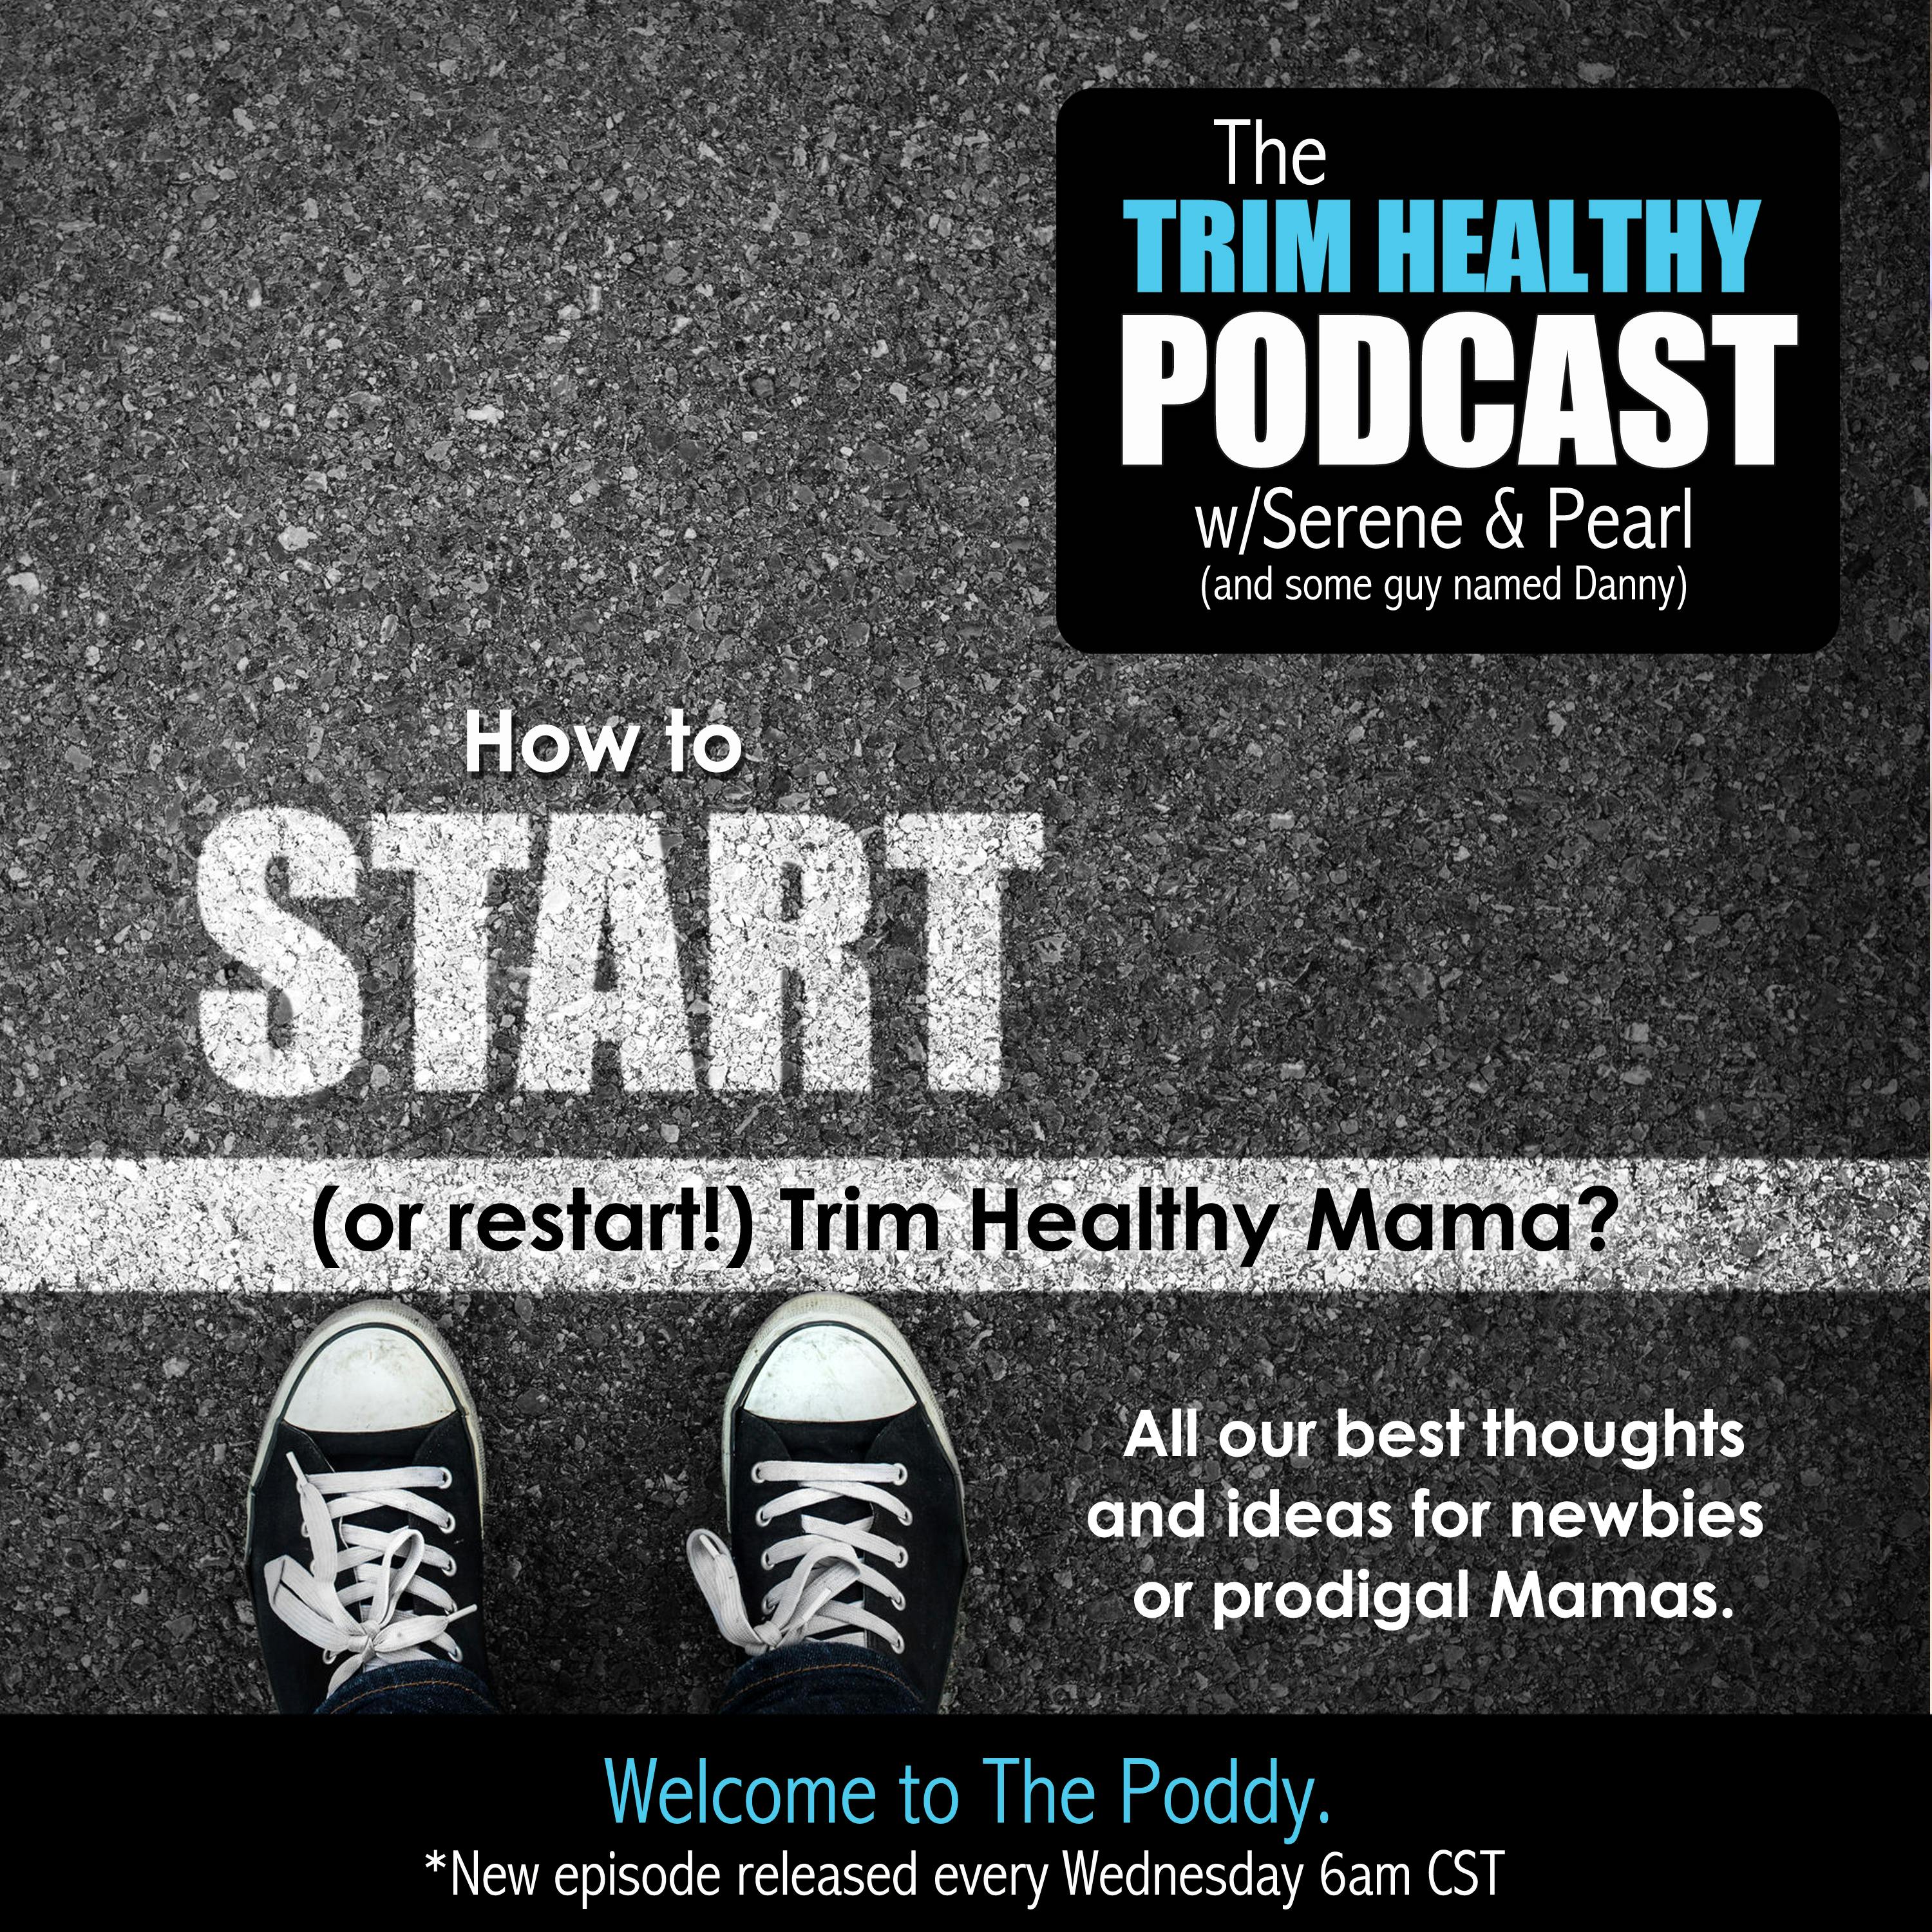 Ep. 117: How to Start (or restart!) Trim Healthy Mama?